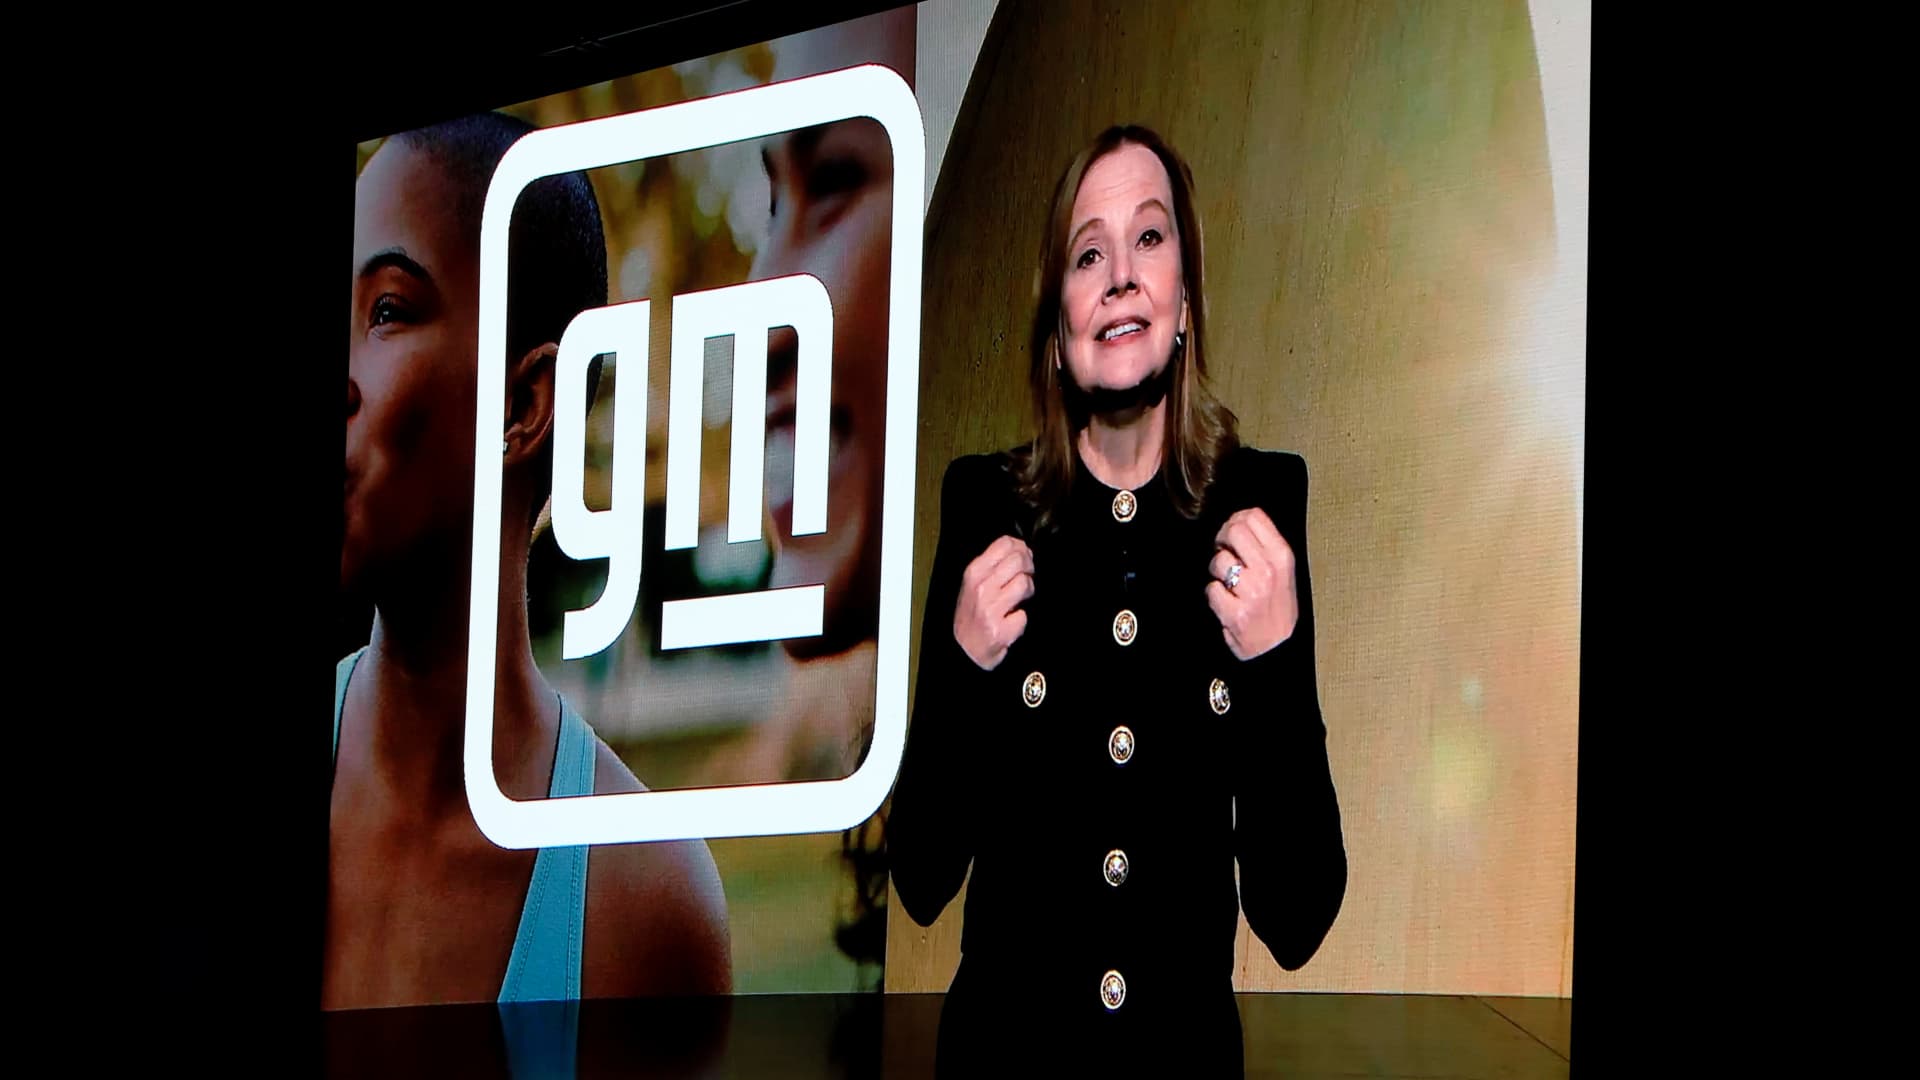 General Motors Chair and CEO Mary Barra is shown on screen via livestream as she introduces her digitally delivered keynote address at CES 2022 at The Venetian Las Vegas on January 5, 2022 in Las Vegas, Nevada.